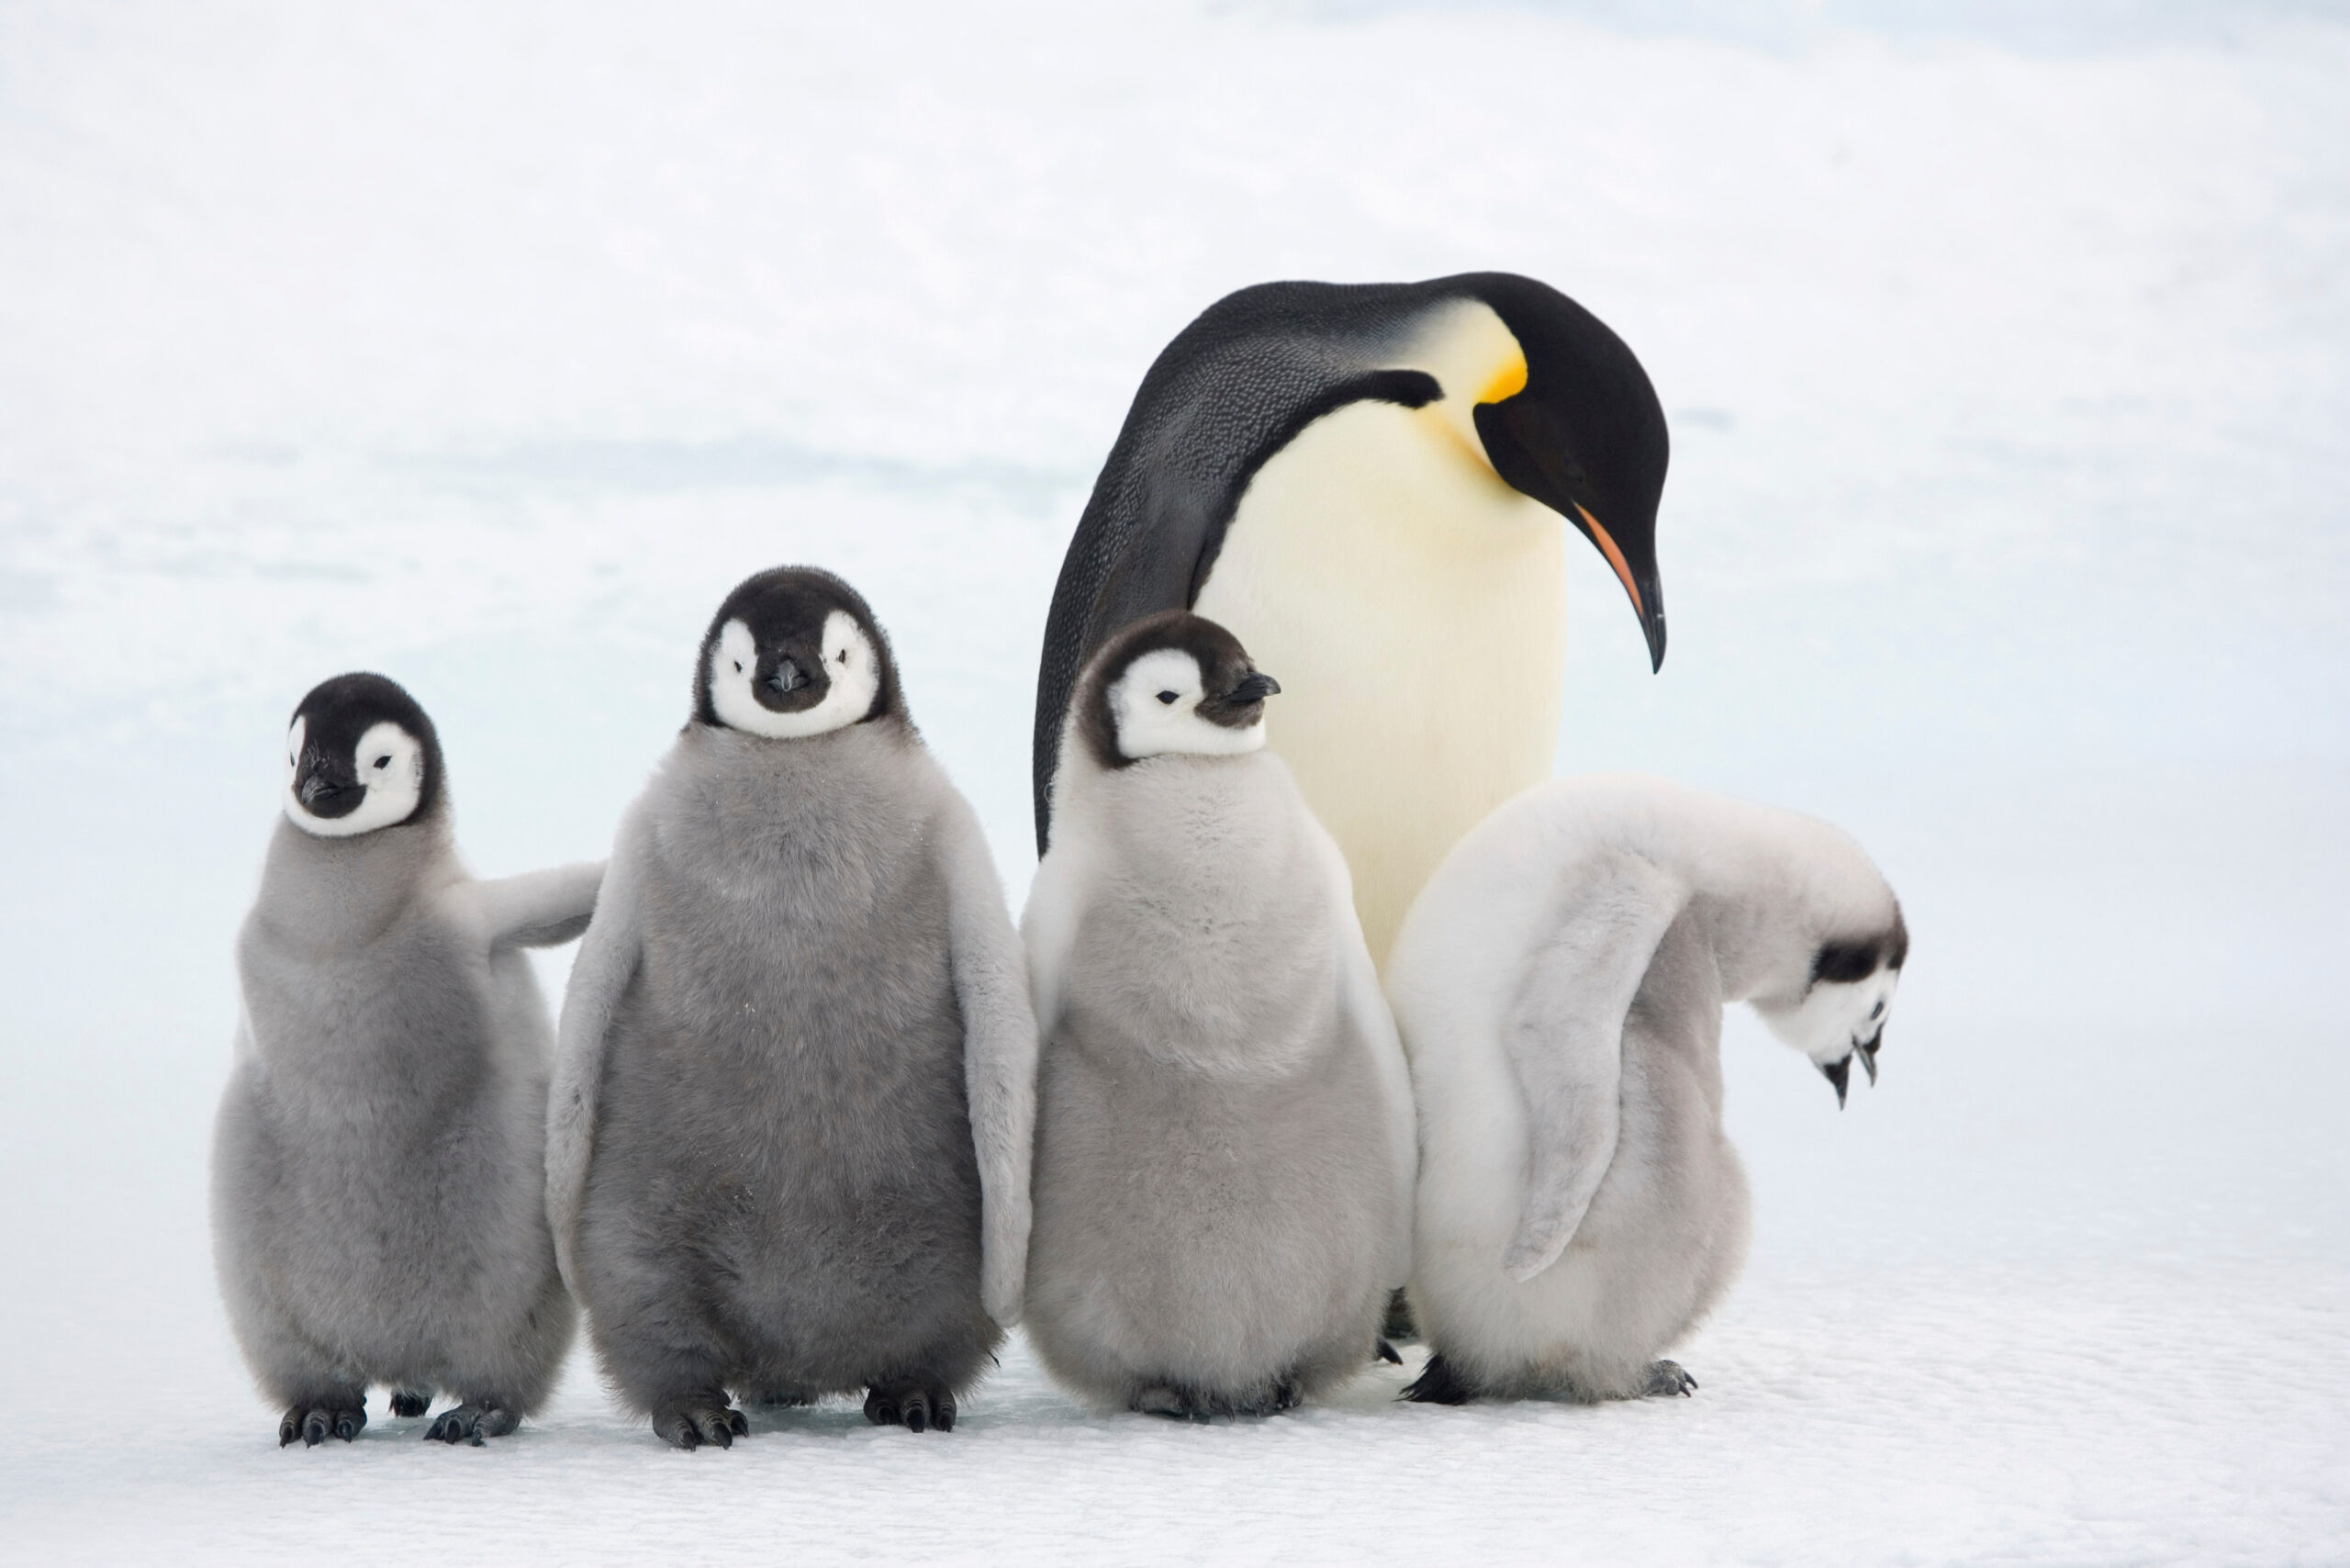 Four Emperor penguin chicks with an adult standing on the snow.